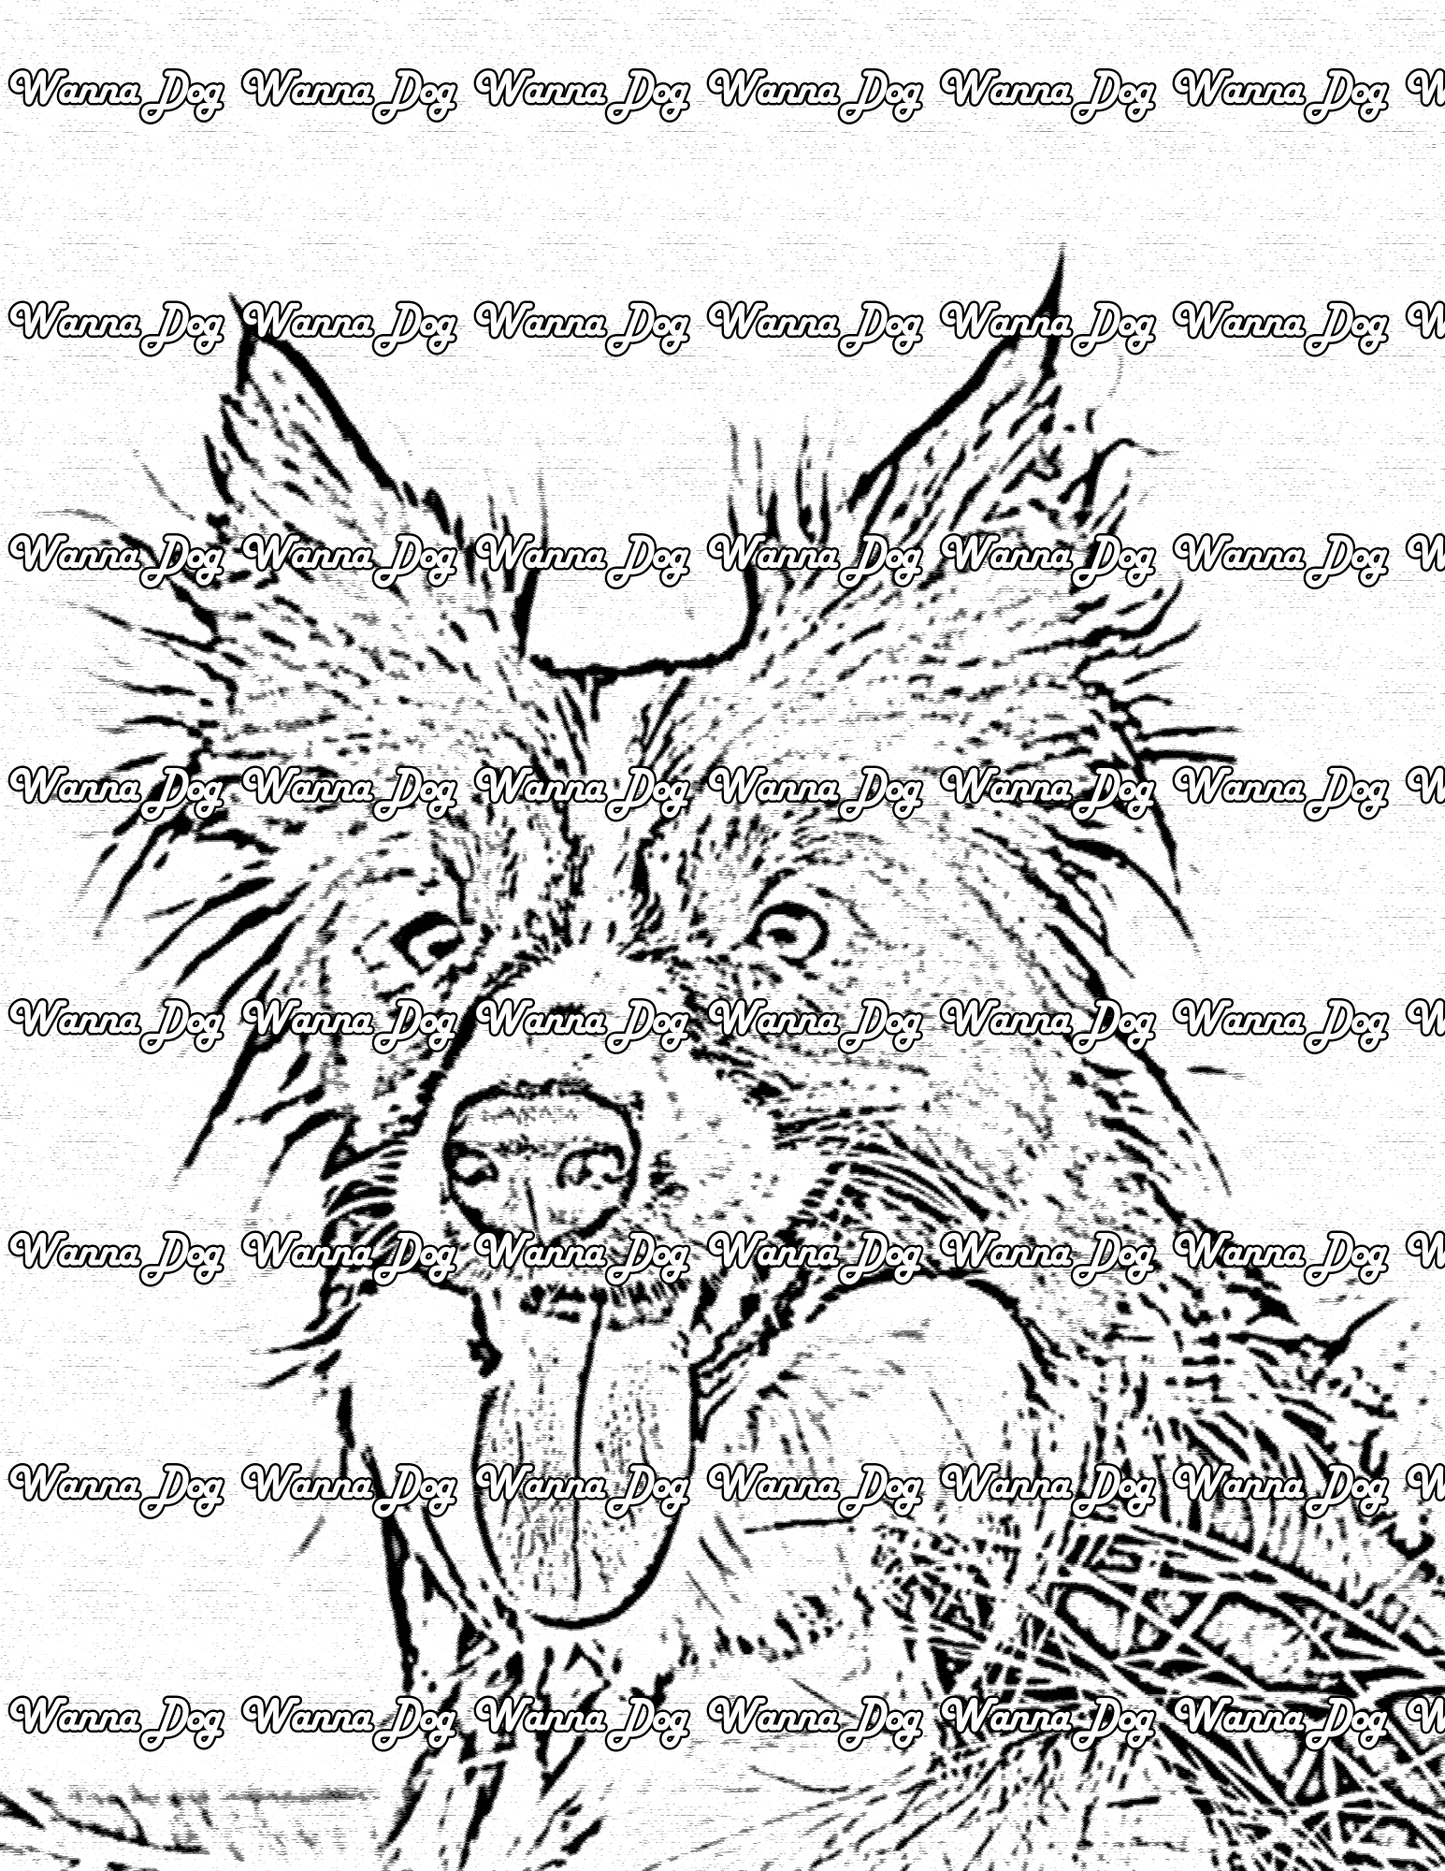 Border Collie Coloring Page of a Border Collie smiling with their tongue out